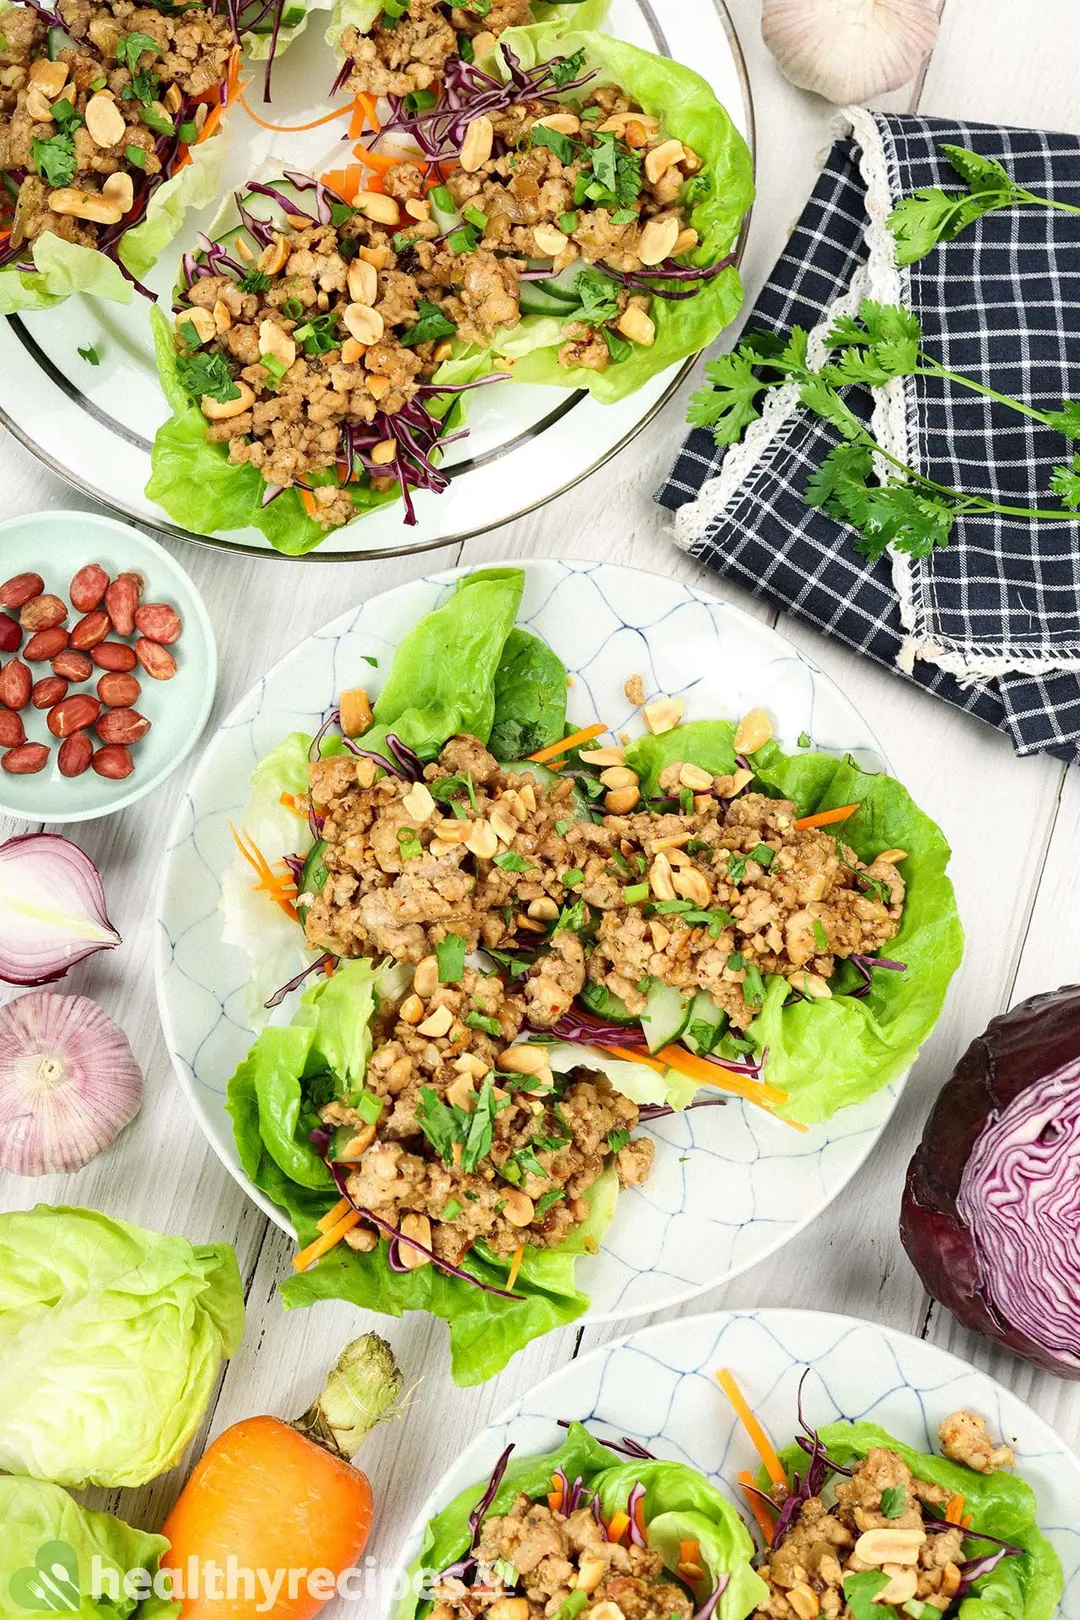 A flatlay of lettuce wrap dishes, cabbage heads, carrots, red onions, peanuts, coriander, and half a red cabbage